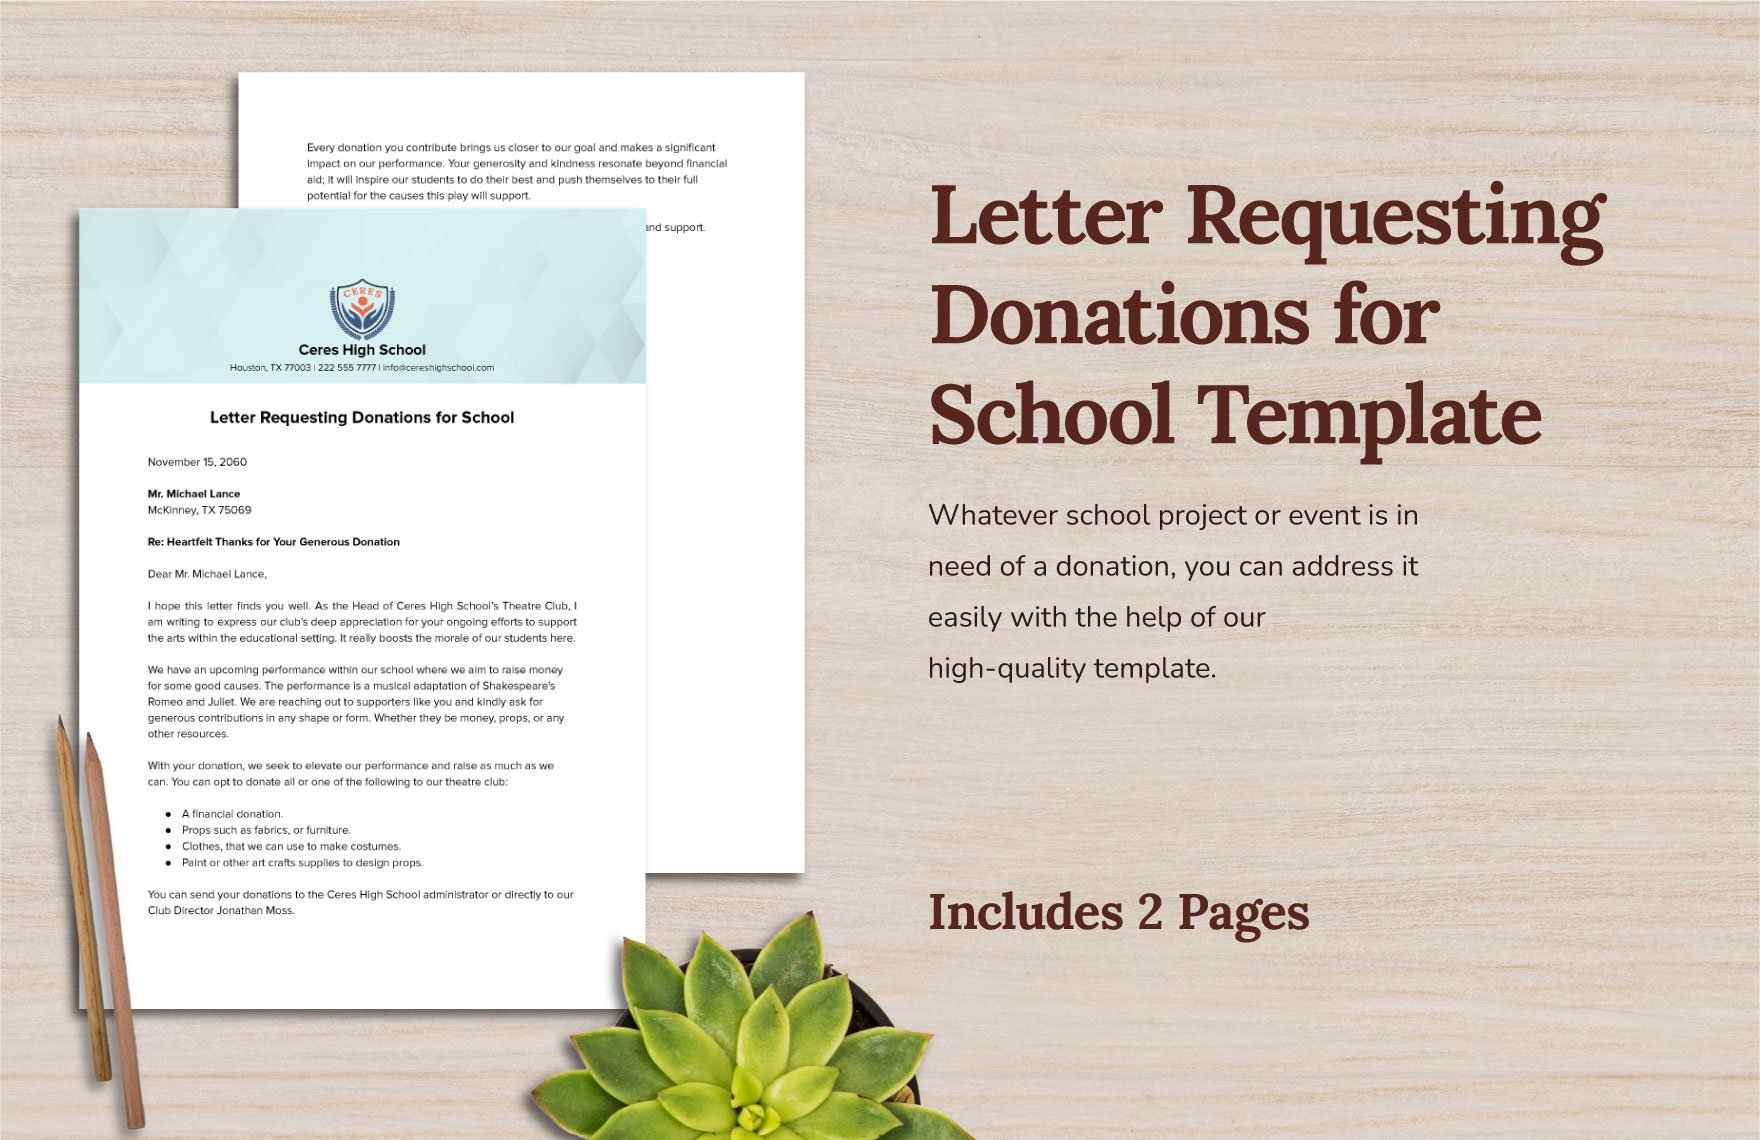 Letter Requesting Donations for School Template